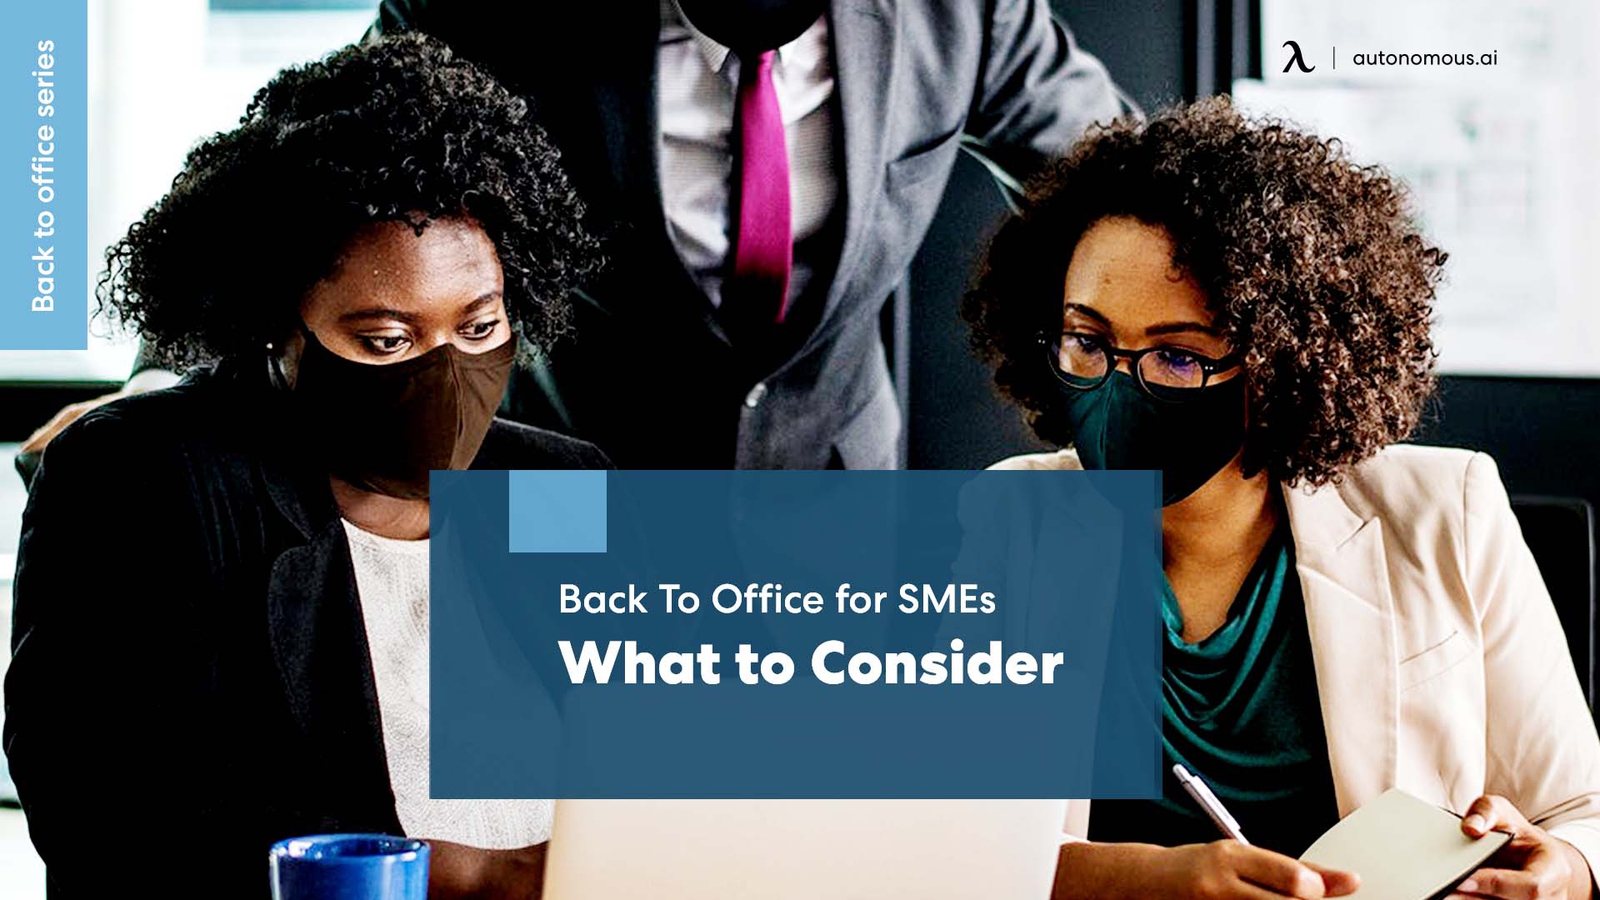 Back To Office for SMEs: What to Consider